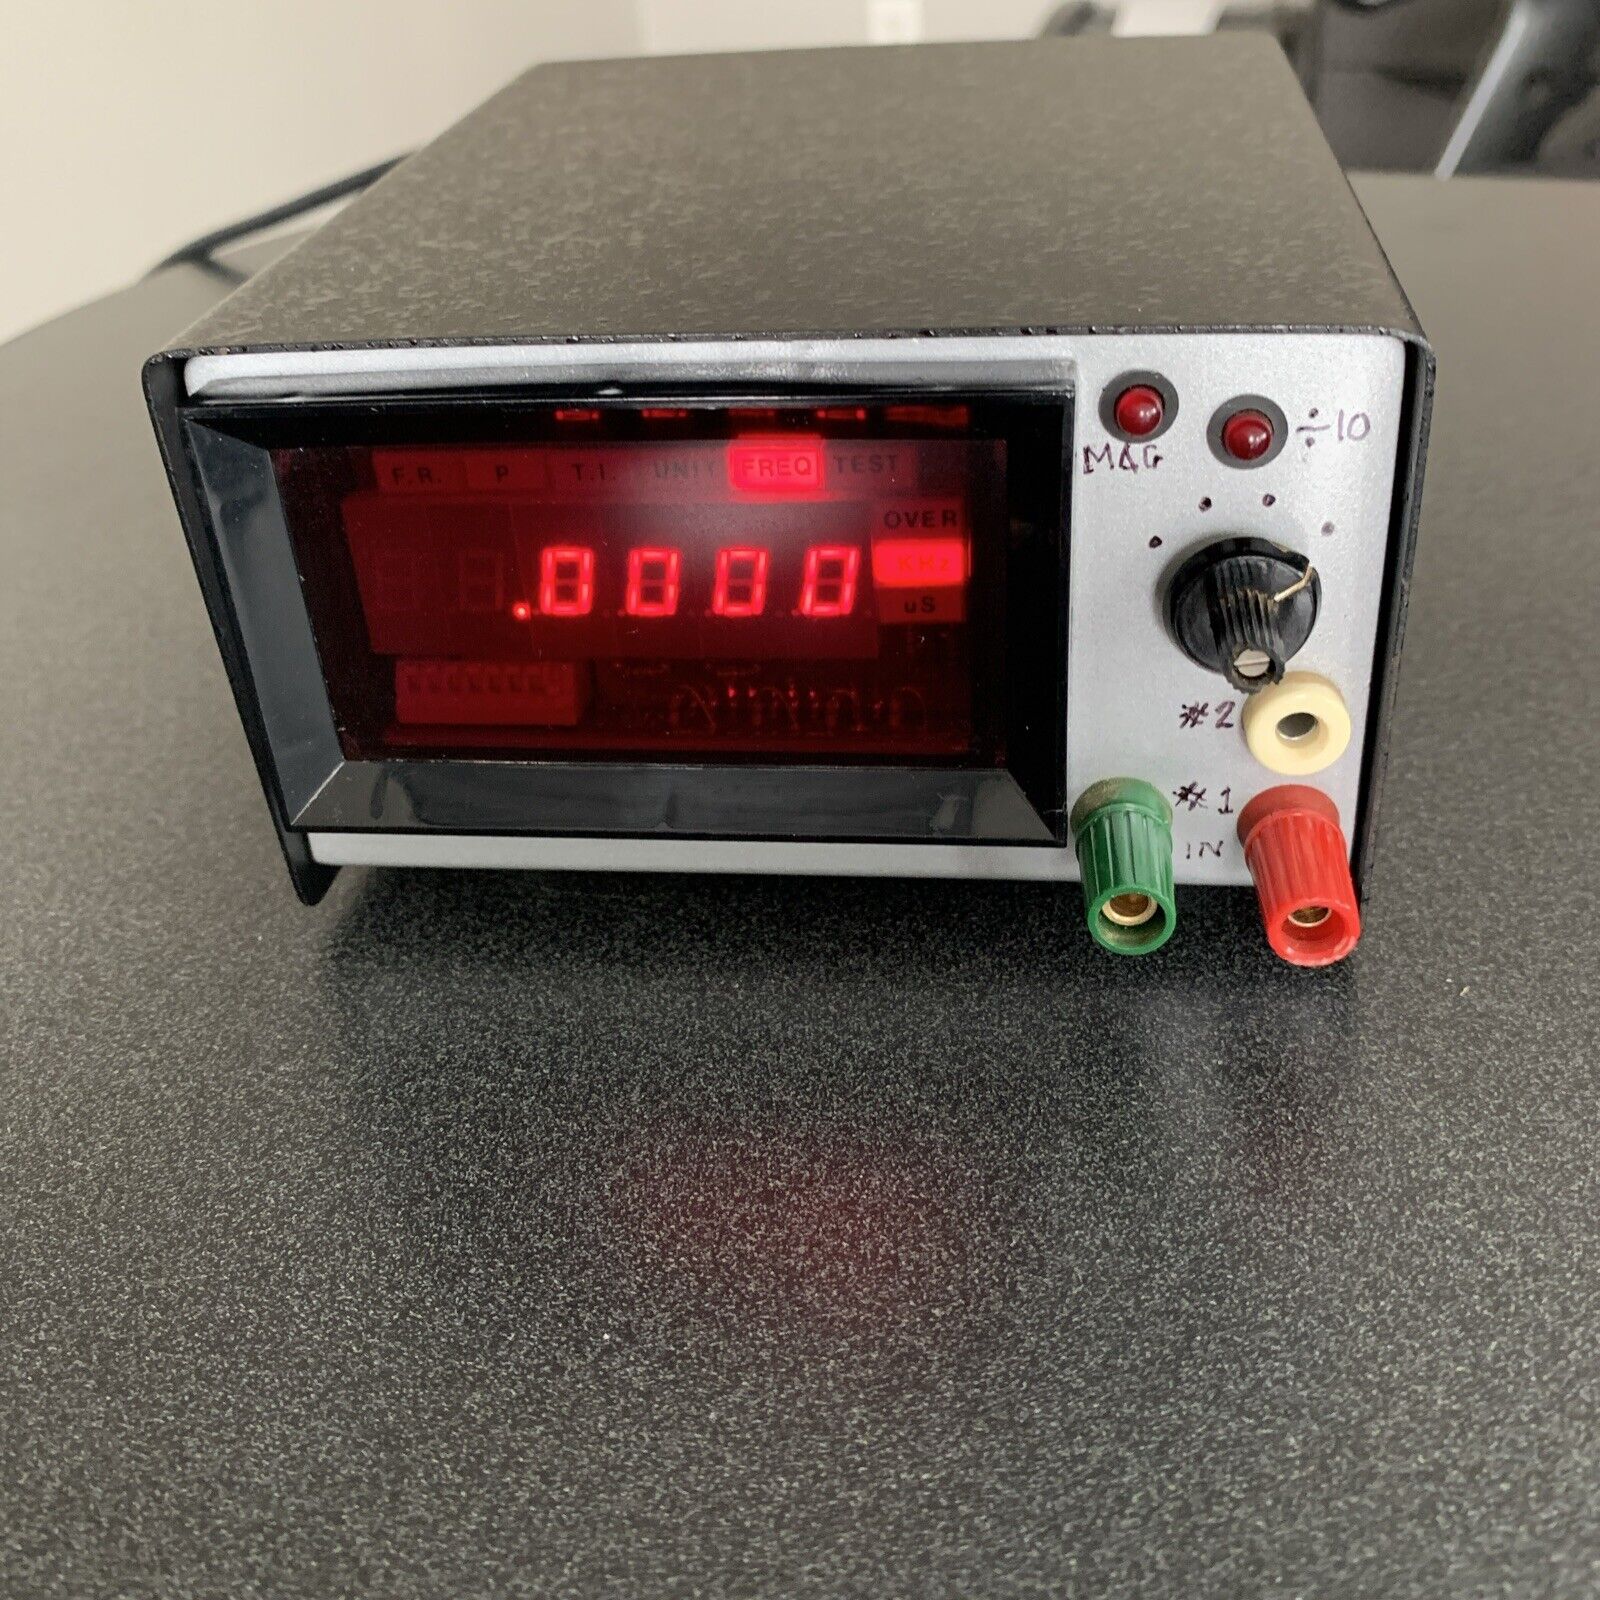 Digital Frequency Counter RED LED display Home Built